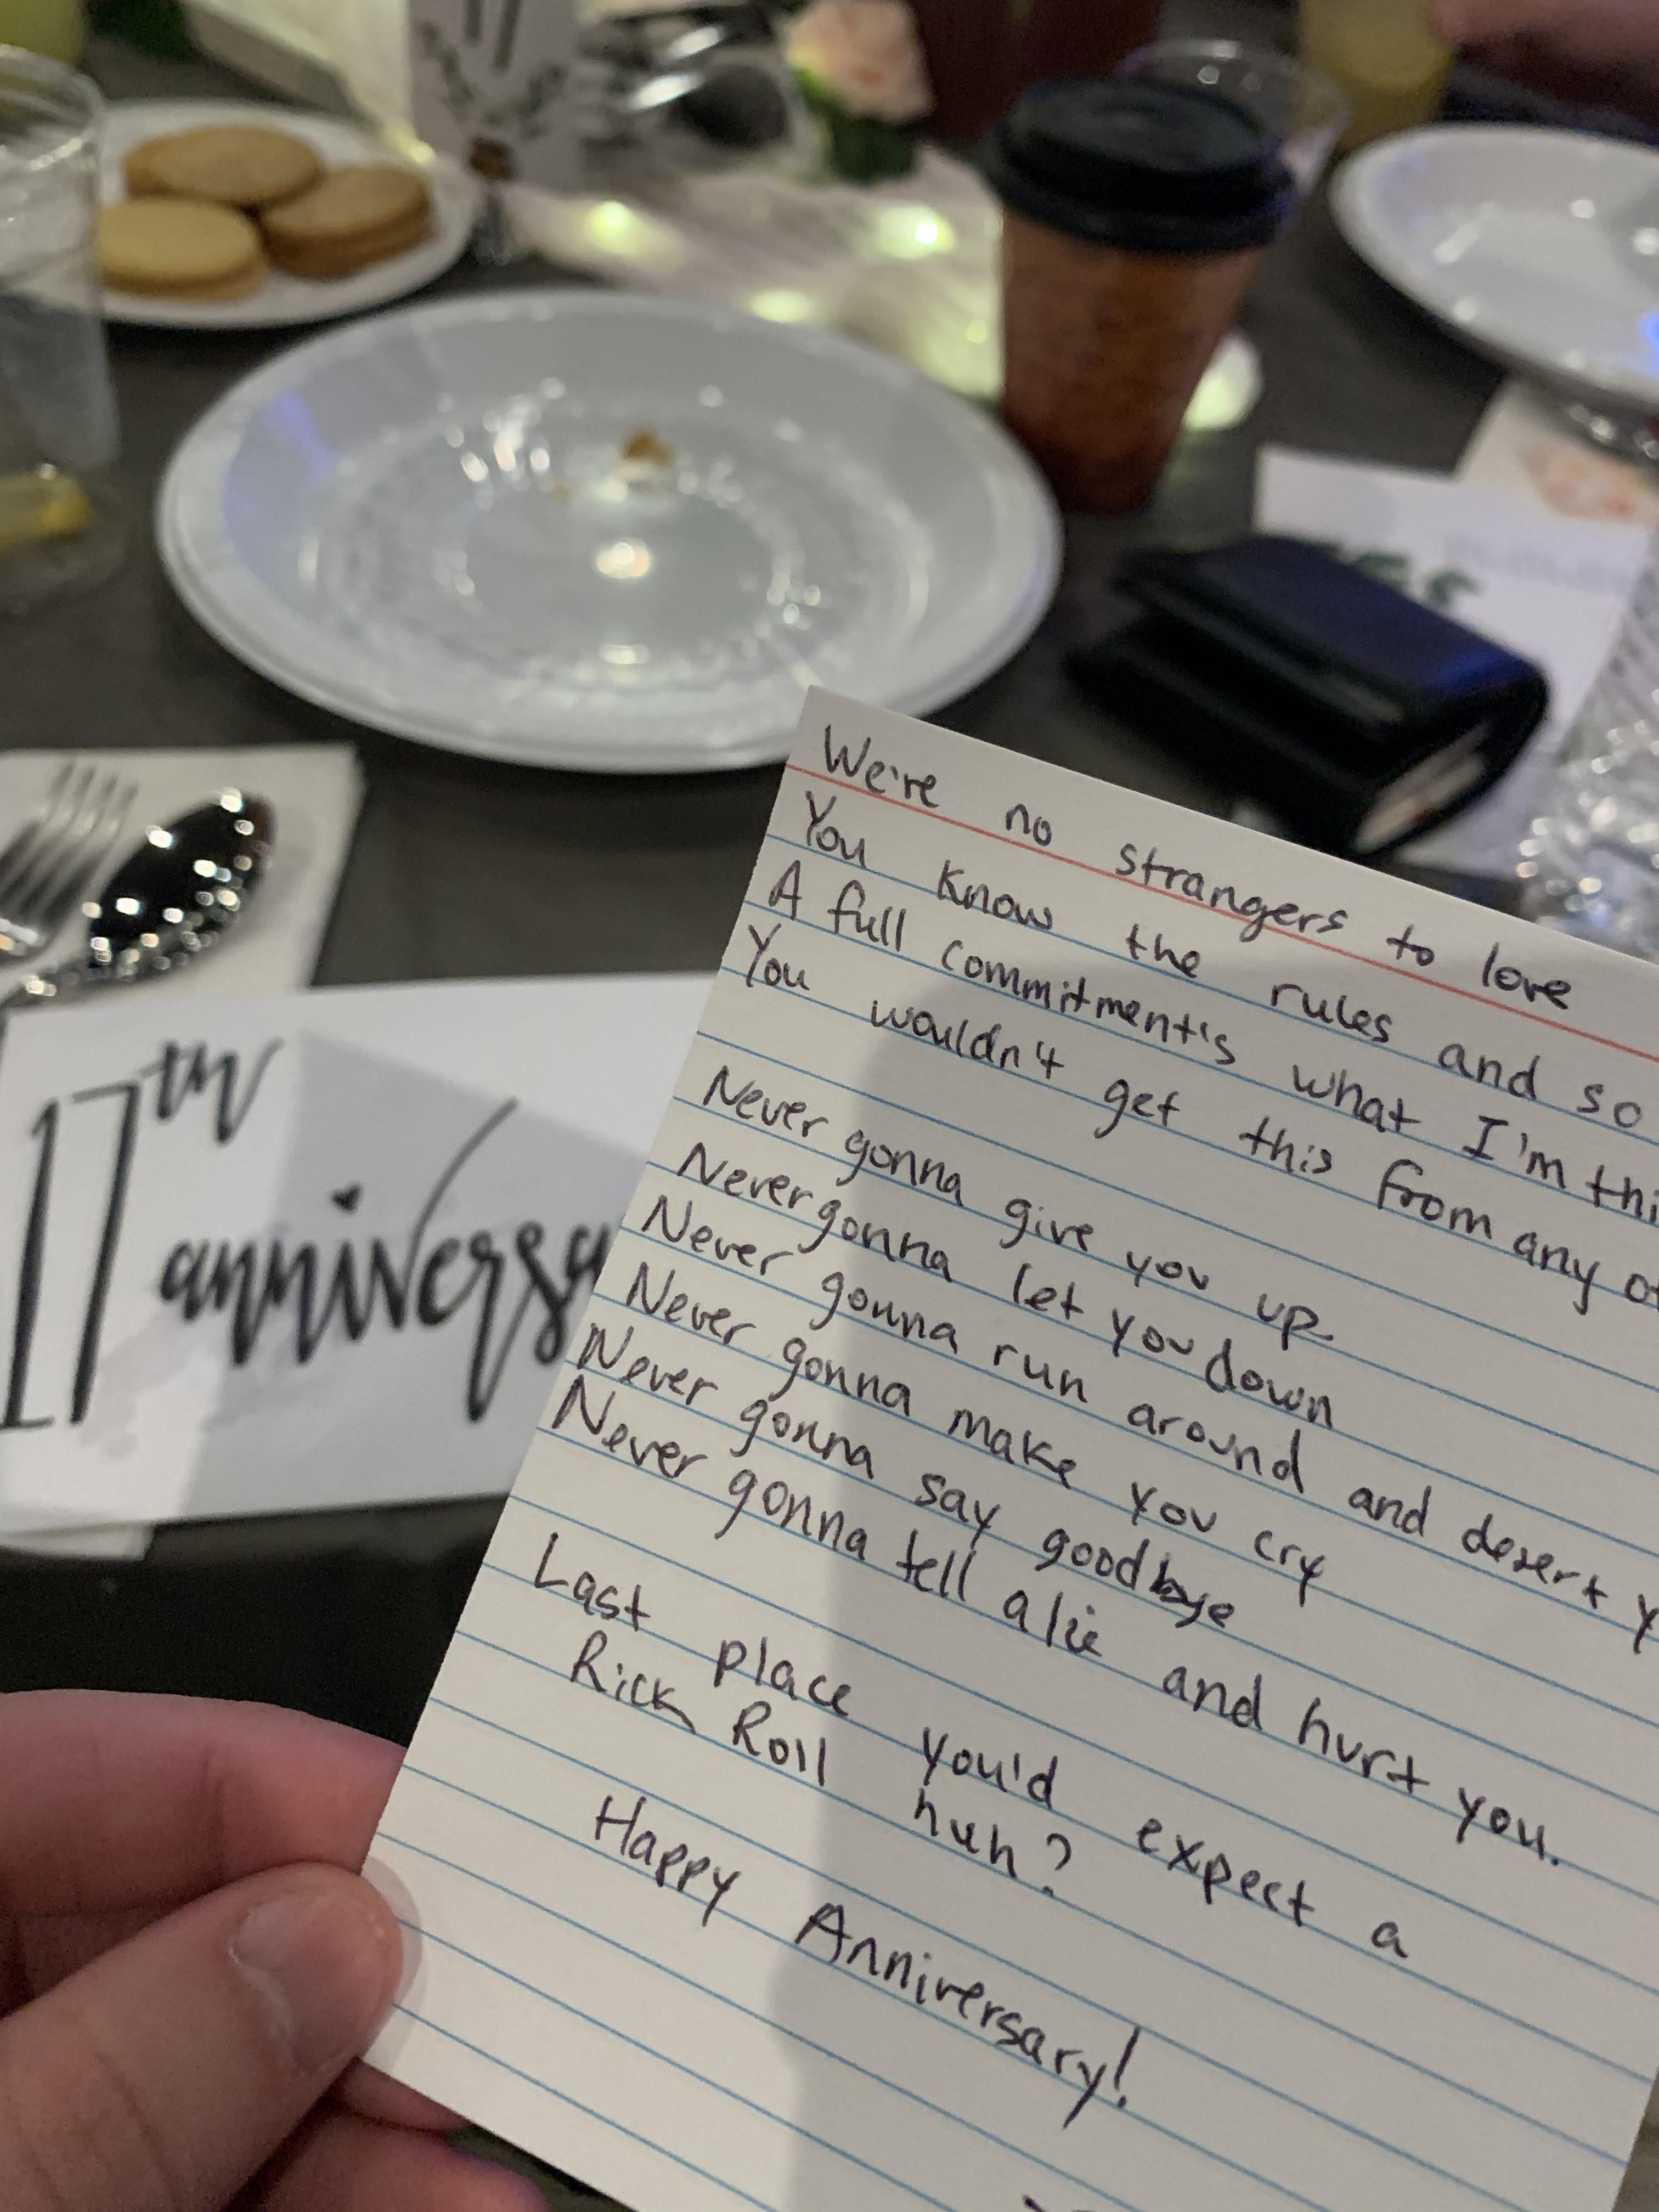 At my friends wedding, they left envelopes and notecards to write something to them in the future. I had to take my chance and Rick Roll them 17 years in the future.